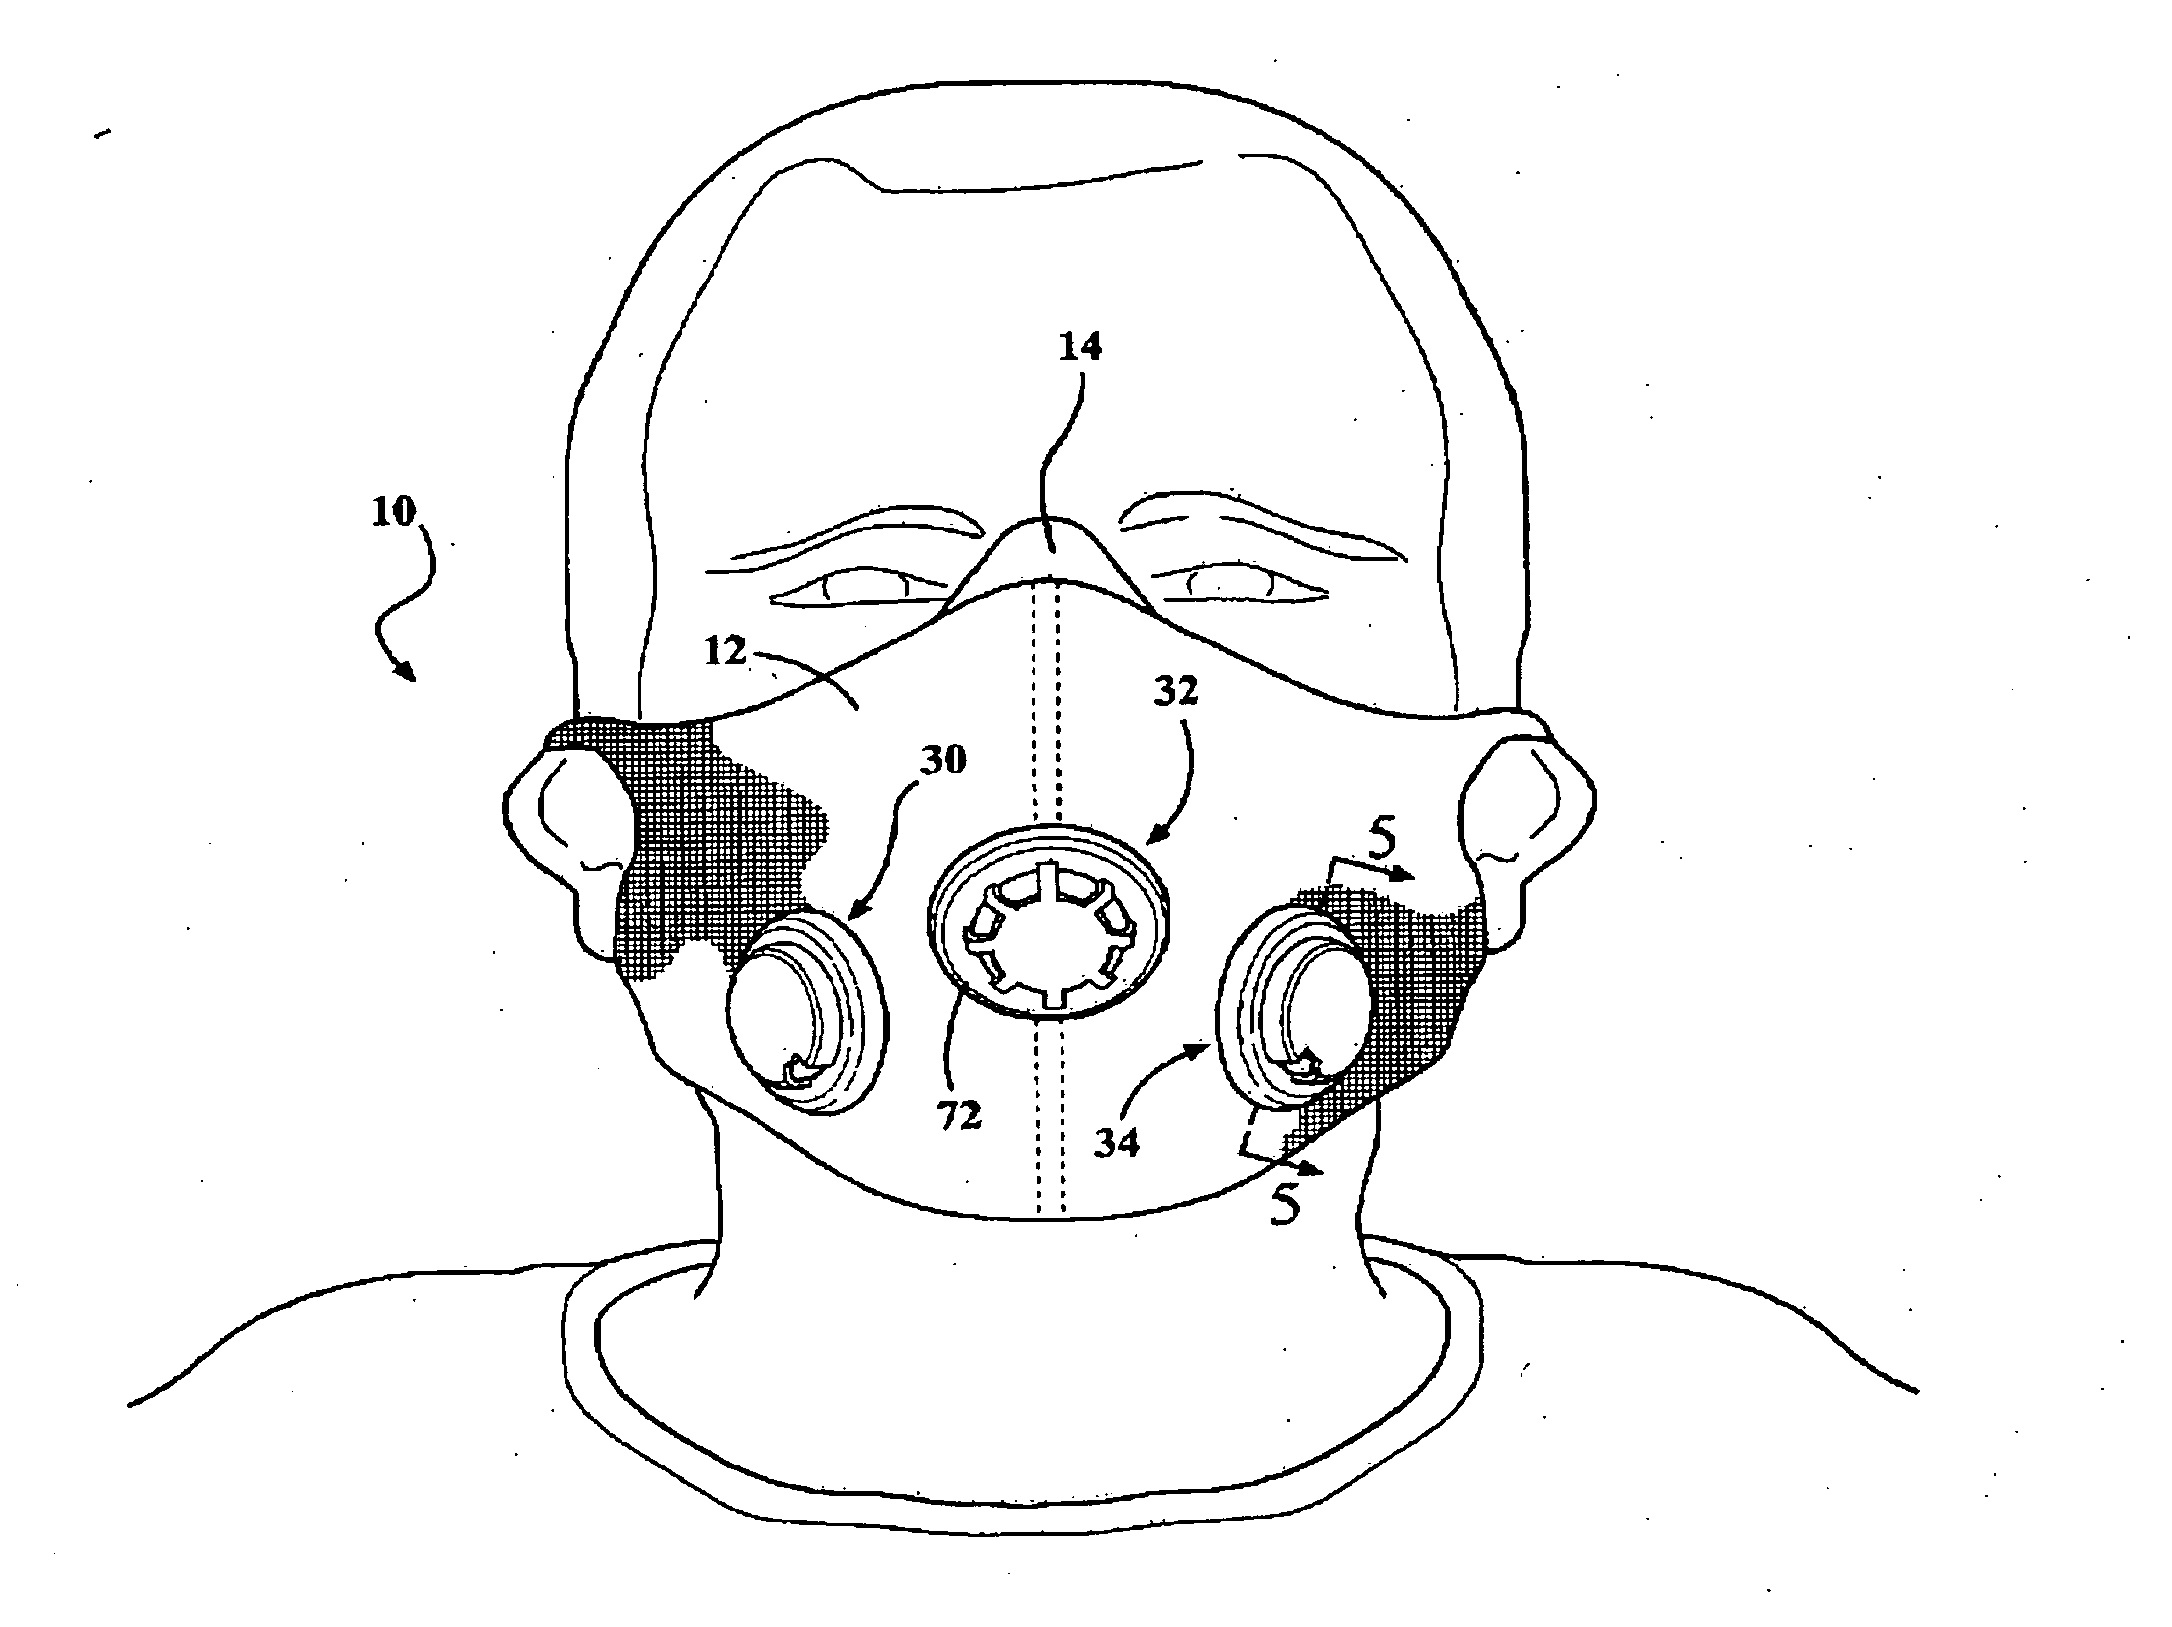 High performance ventilatory training mask incorporating multiple and adjustable air admittance valves for replicating various encountered altitude resistances